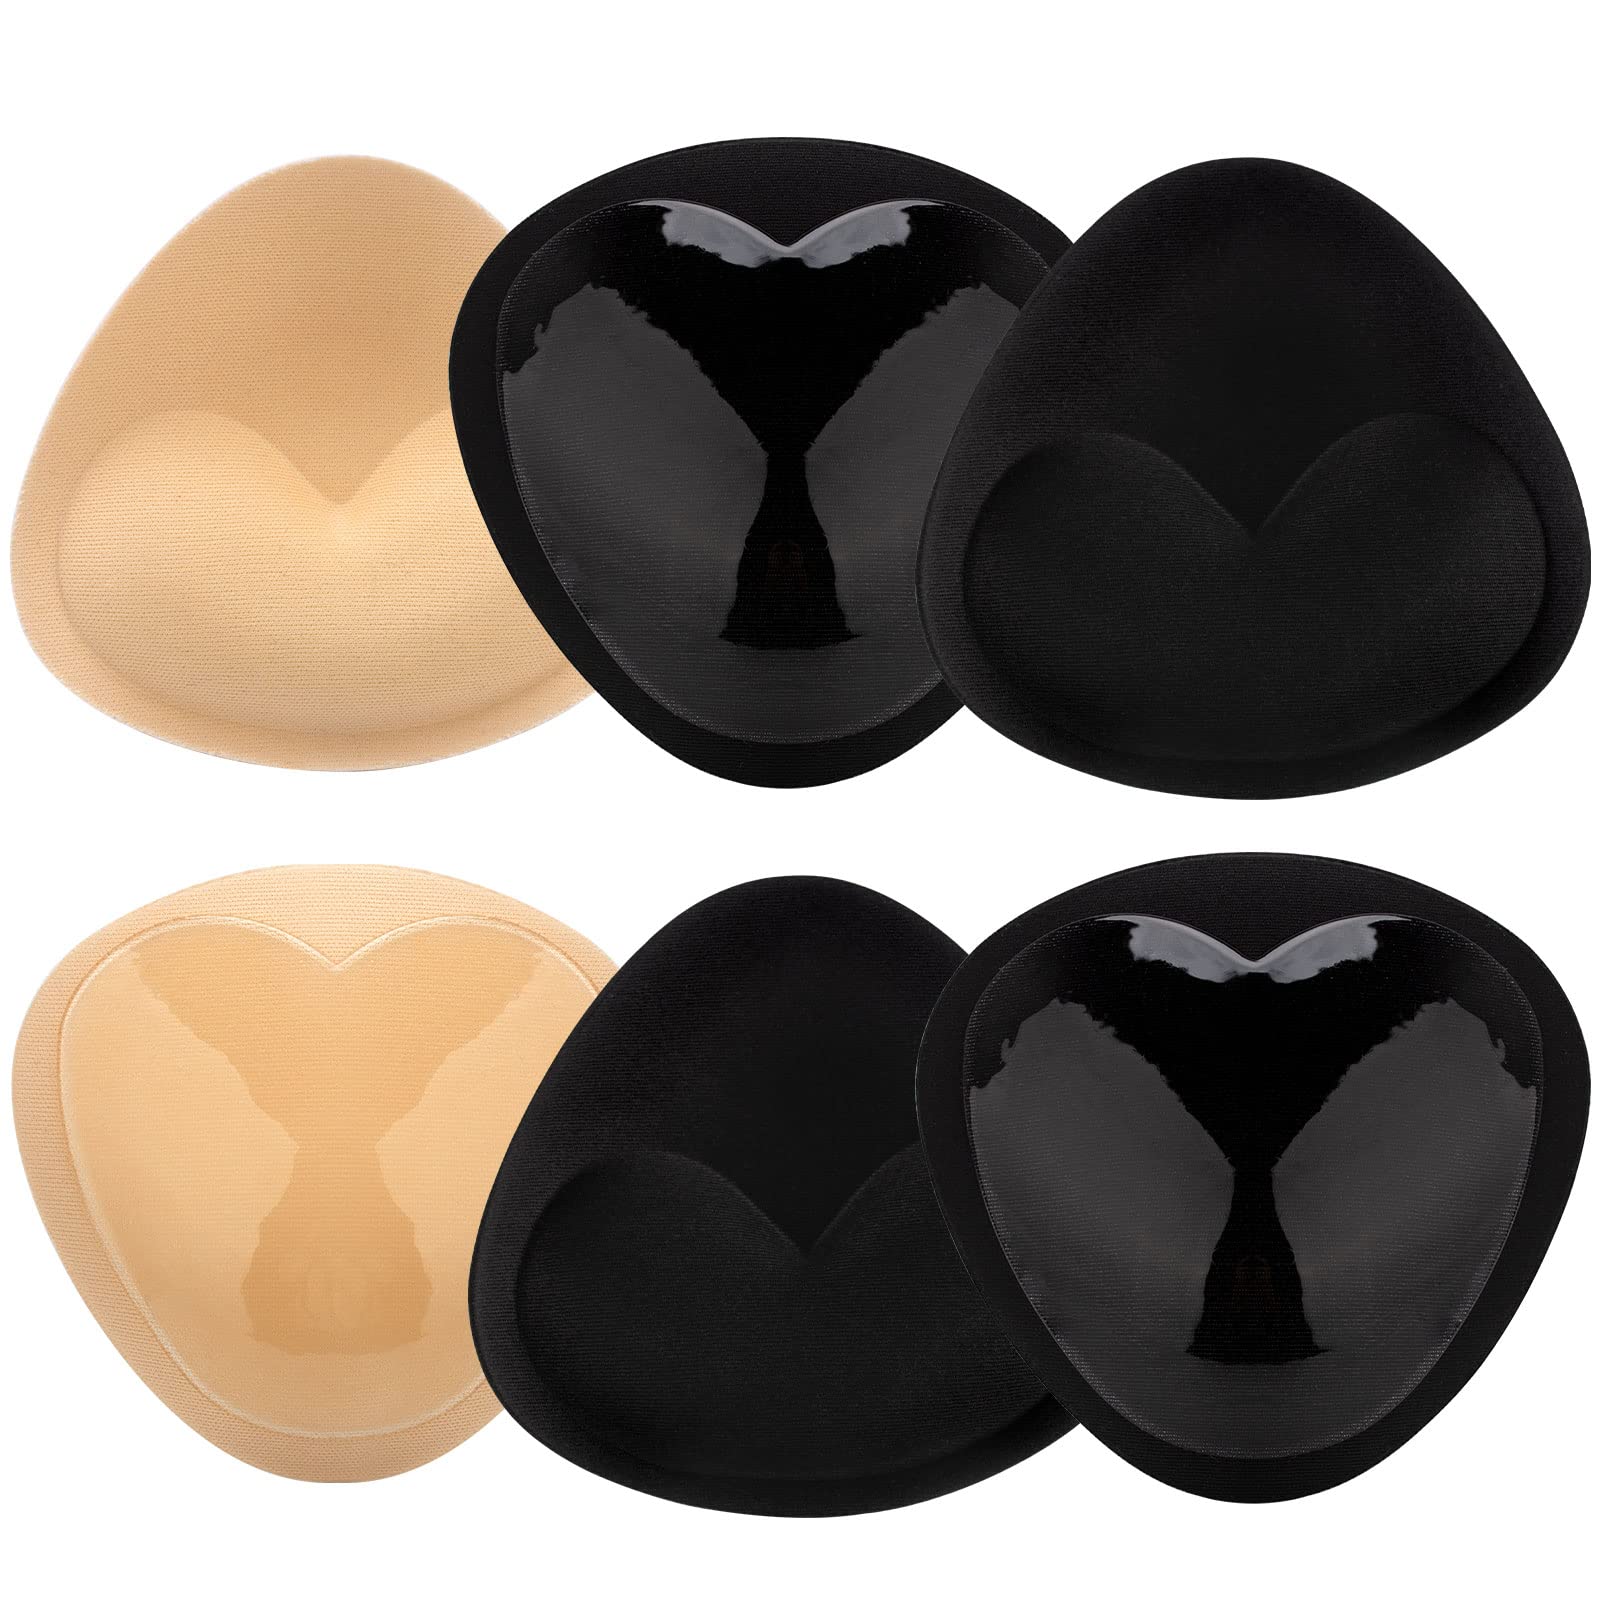 Reusable Push Up Breathable Self-Adhesive Sticky Bra Cups Silicone Bra  Inserts Breast Enhancer Lift Breast Pads TRIANGLE DARK SKIN